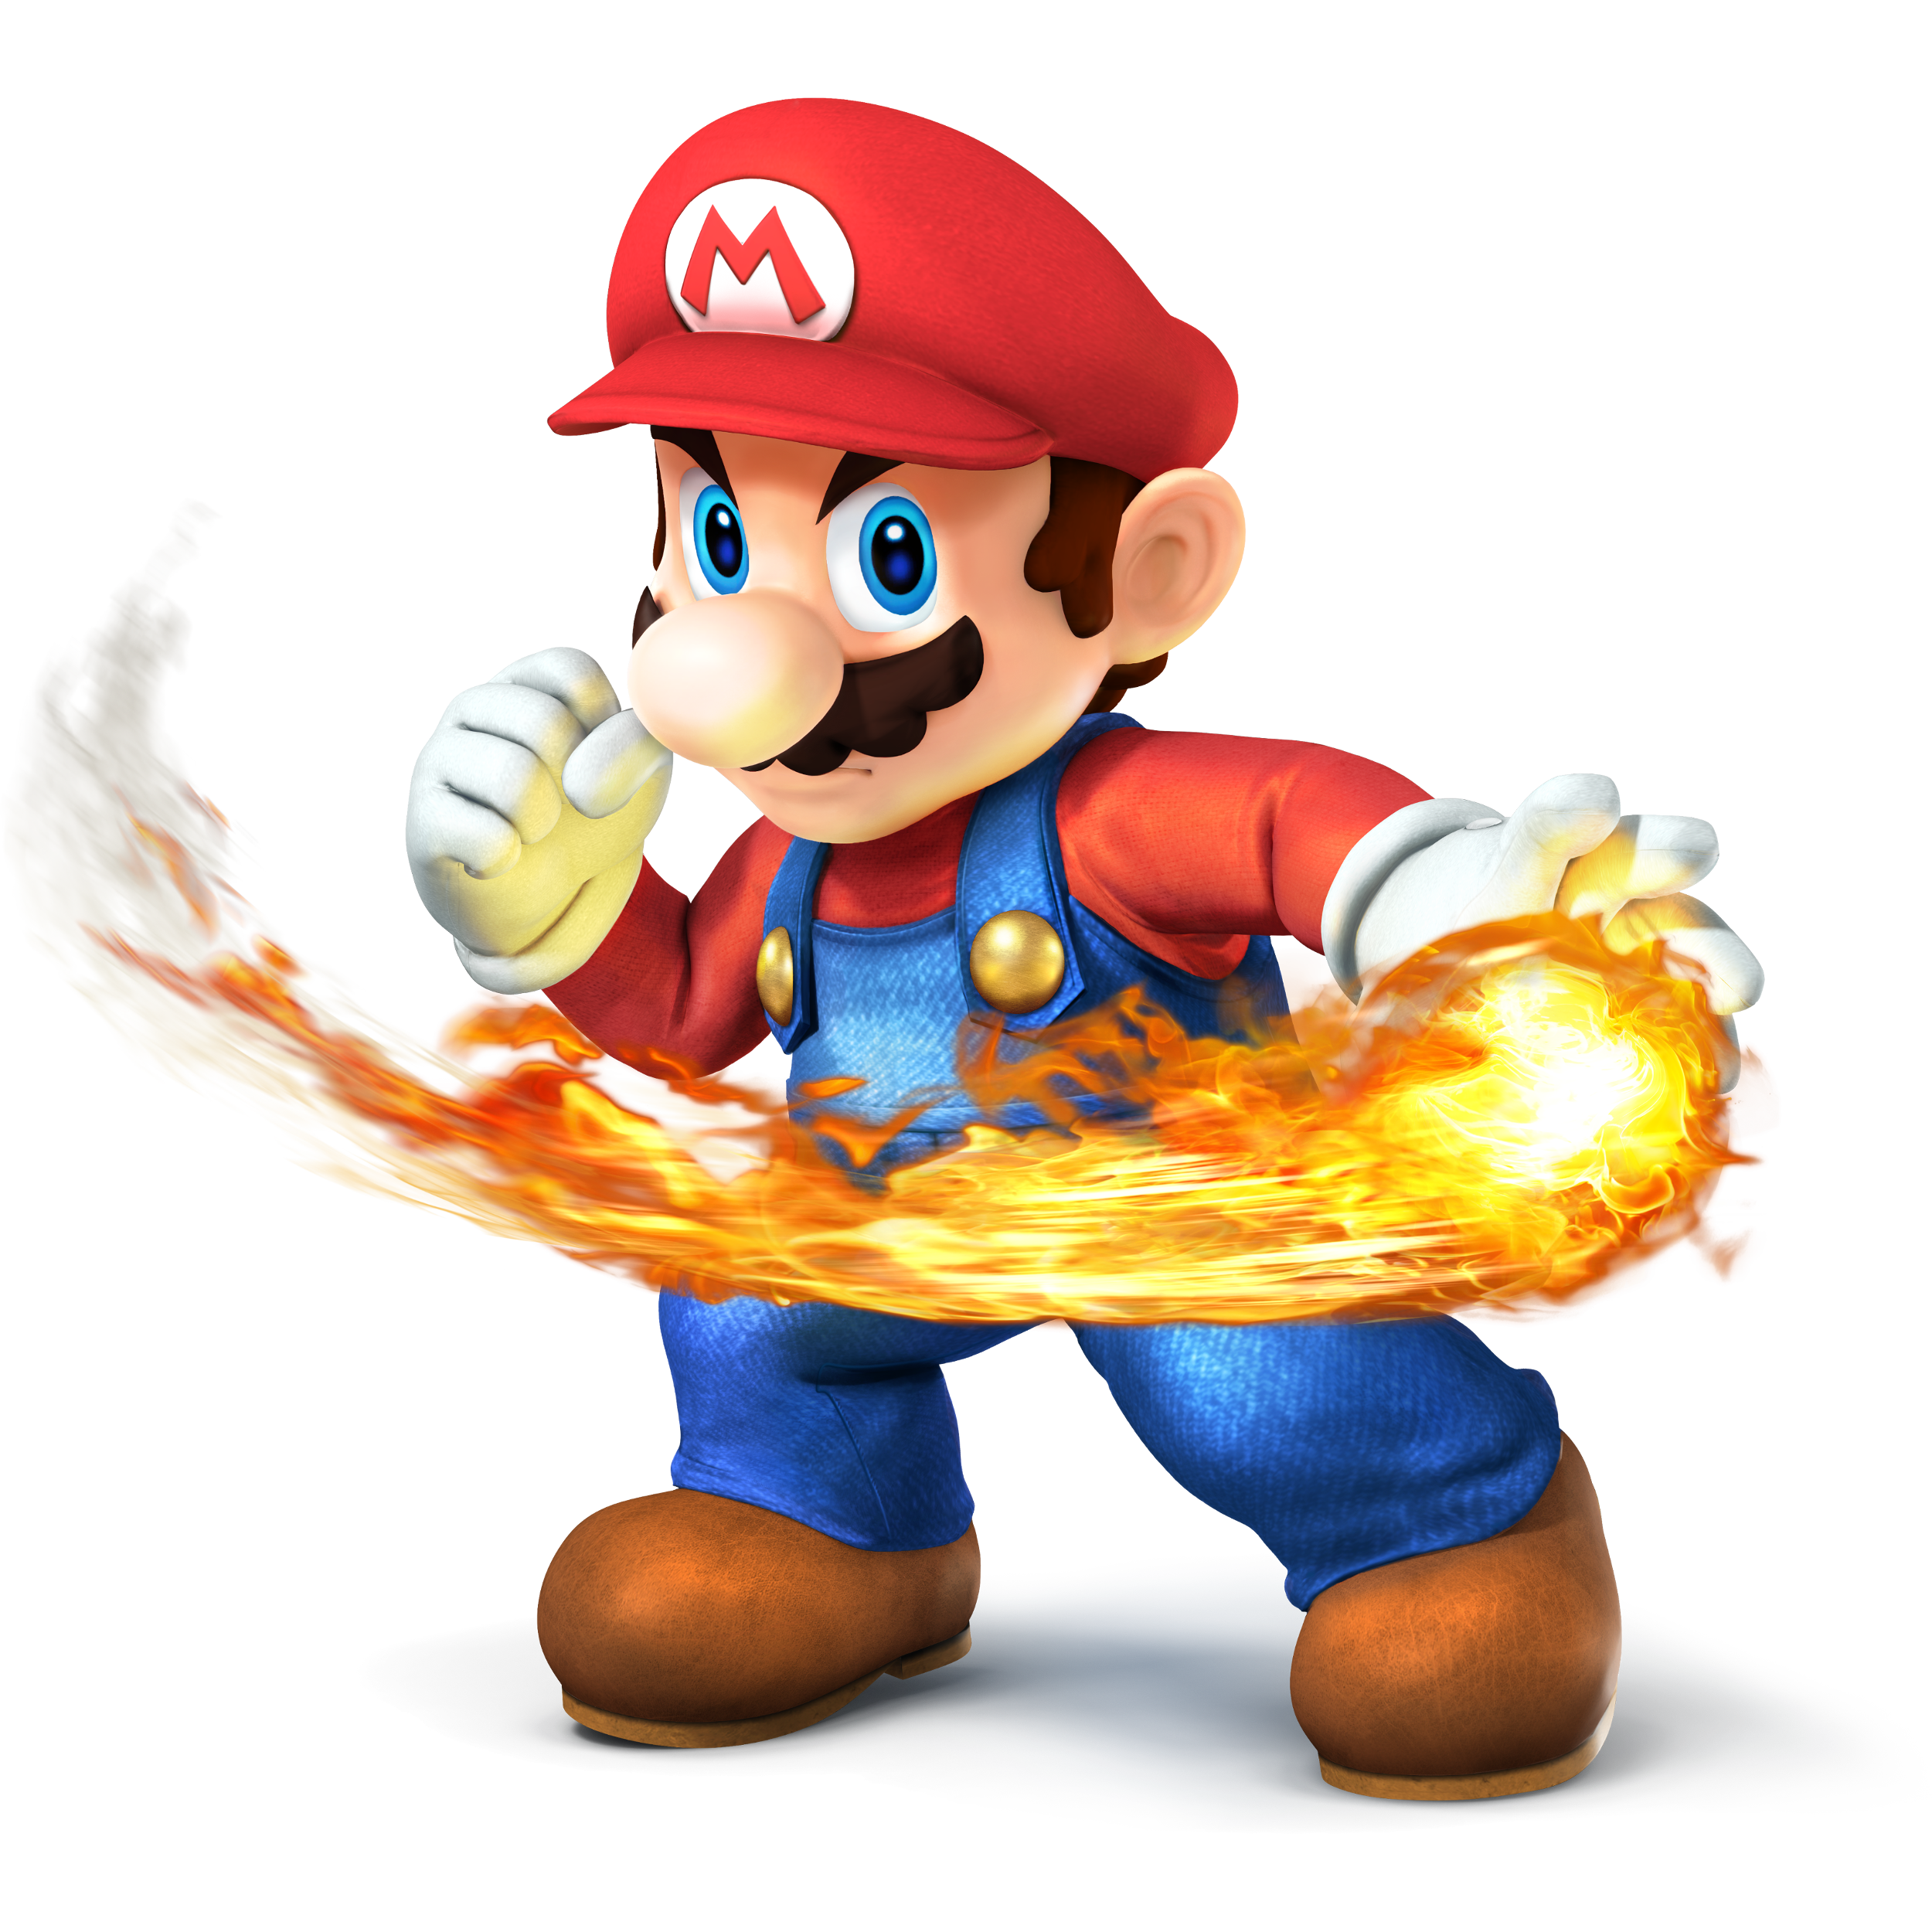 Mario as he appears in Super Smash Bros. 4.